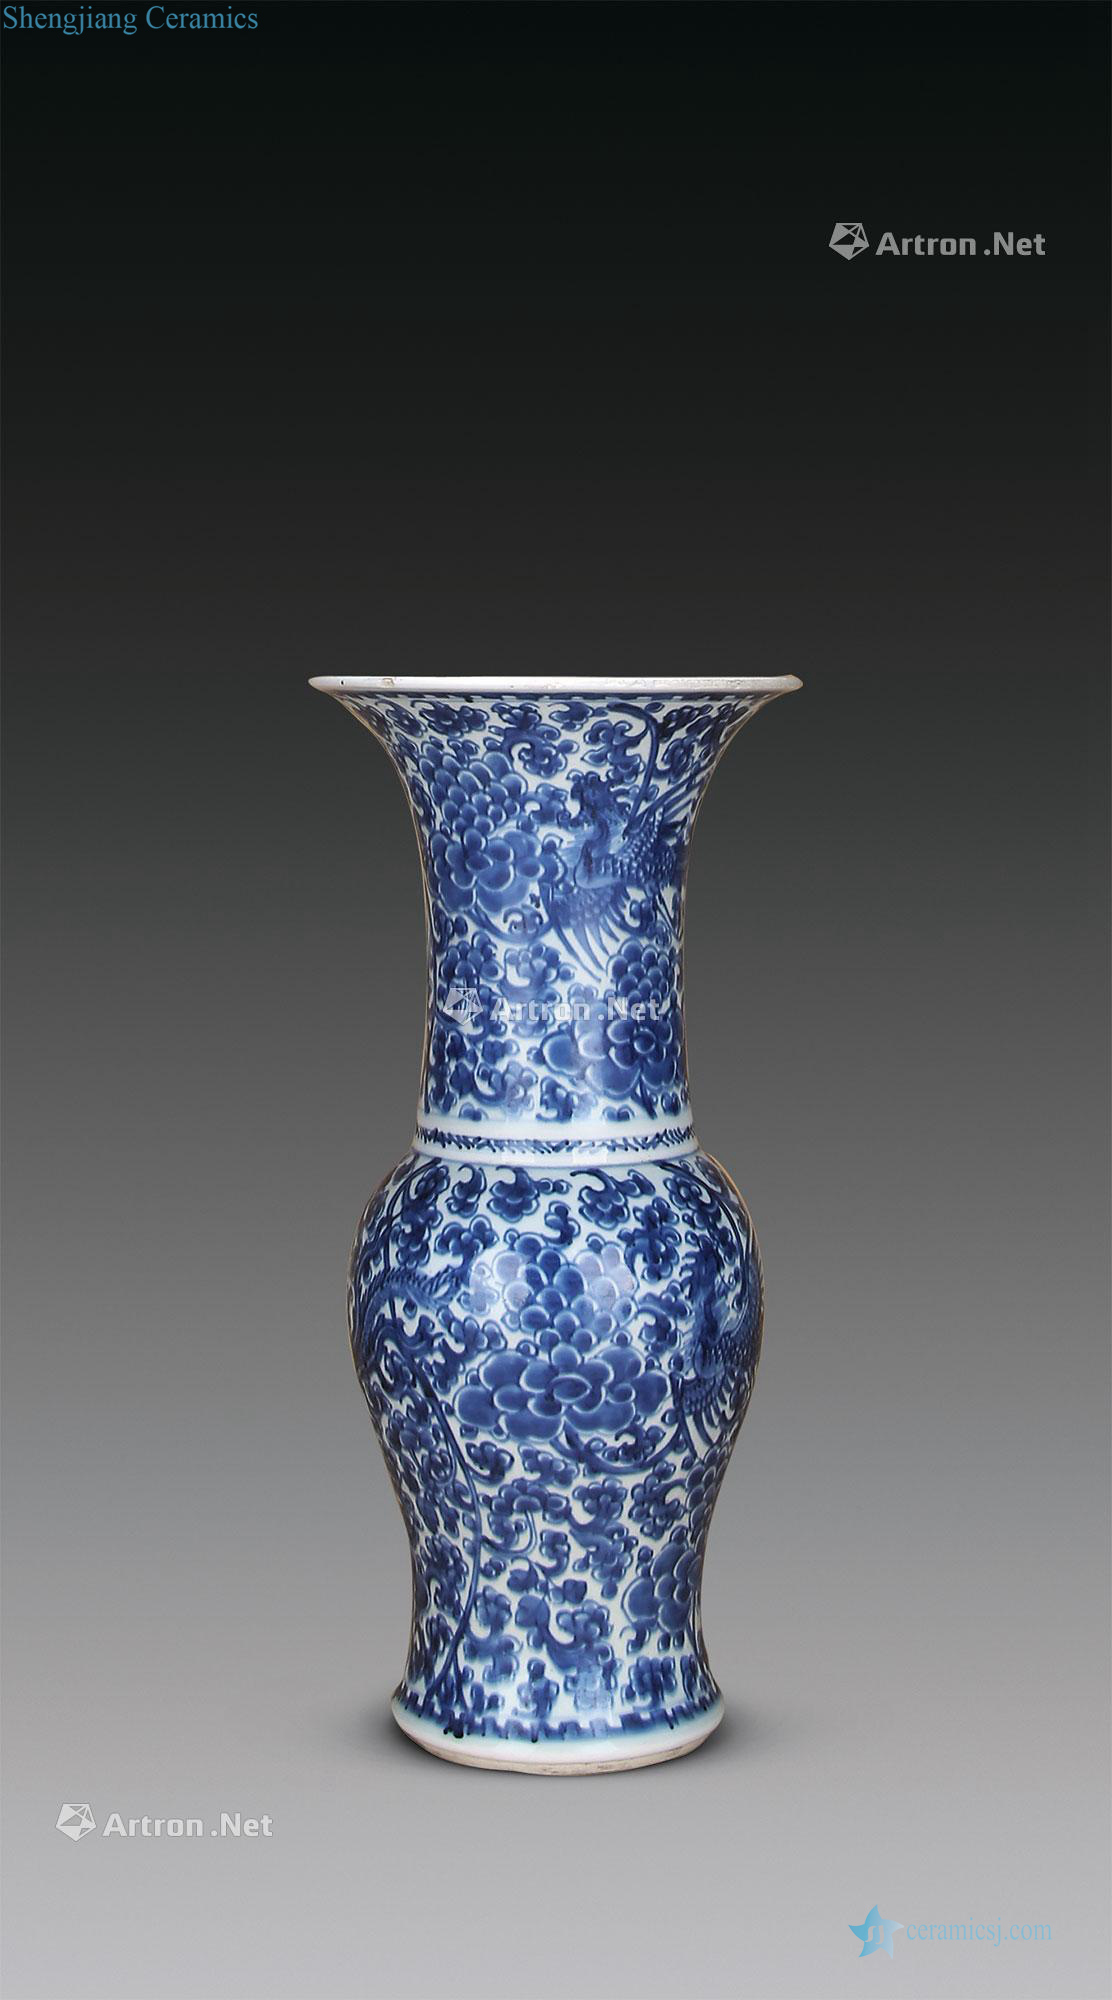 The qing emperor kangxi Wear peony grains flower vase with blue and white chicken